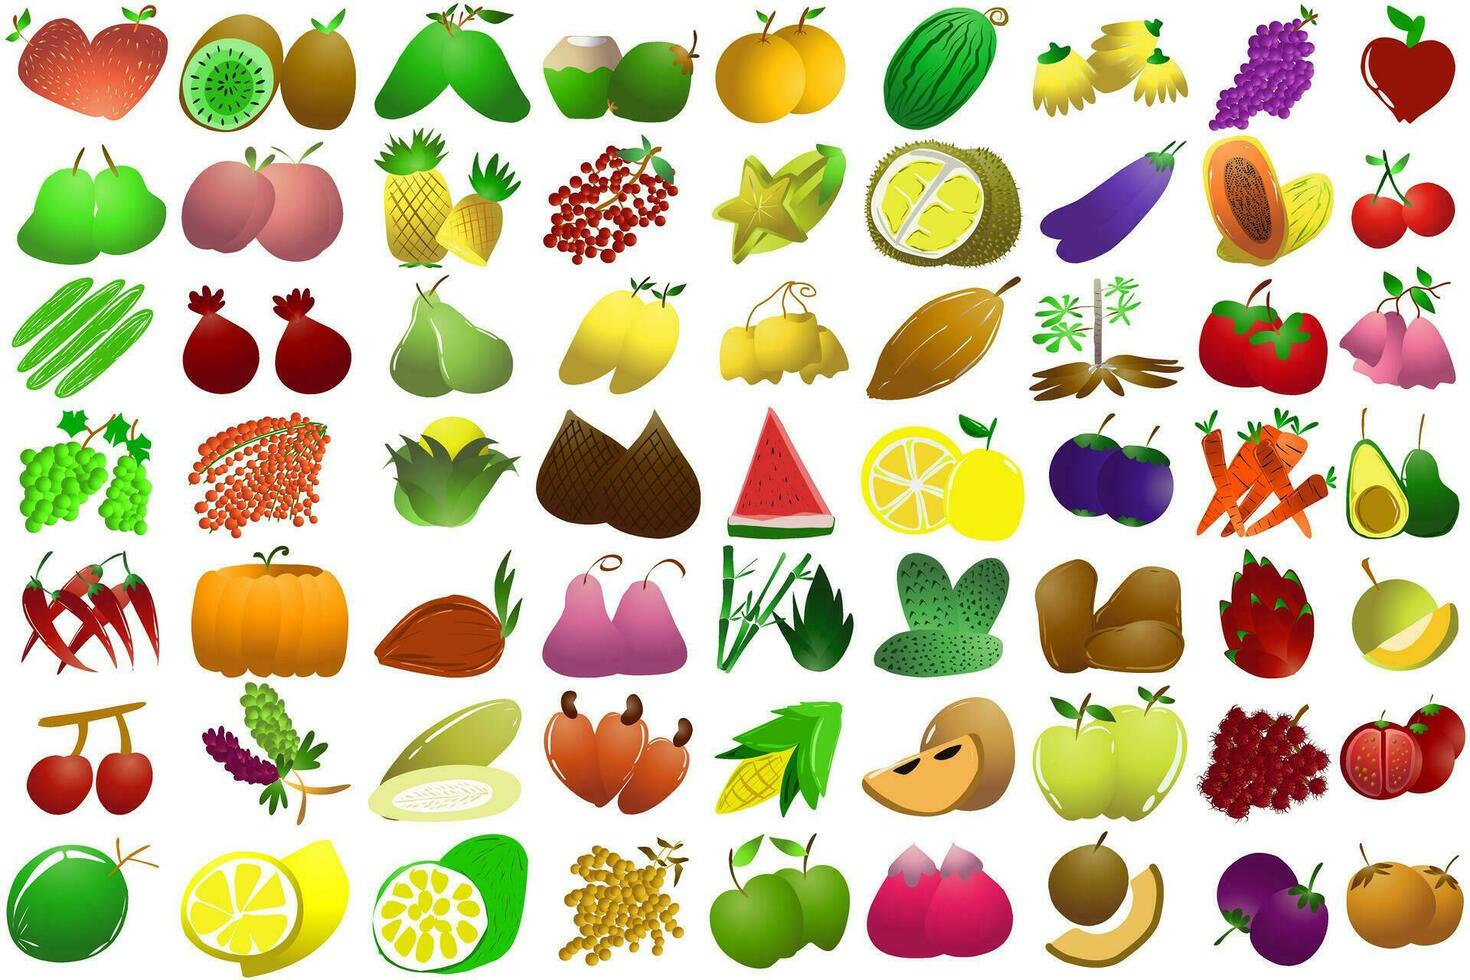 Illustration of types of fruit. Perfect for elements of cookbooks, magazines, newspapers, presentations, advertising vector